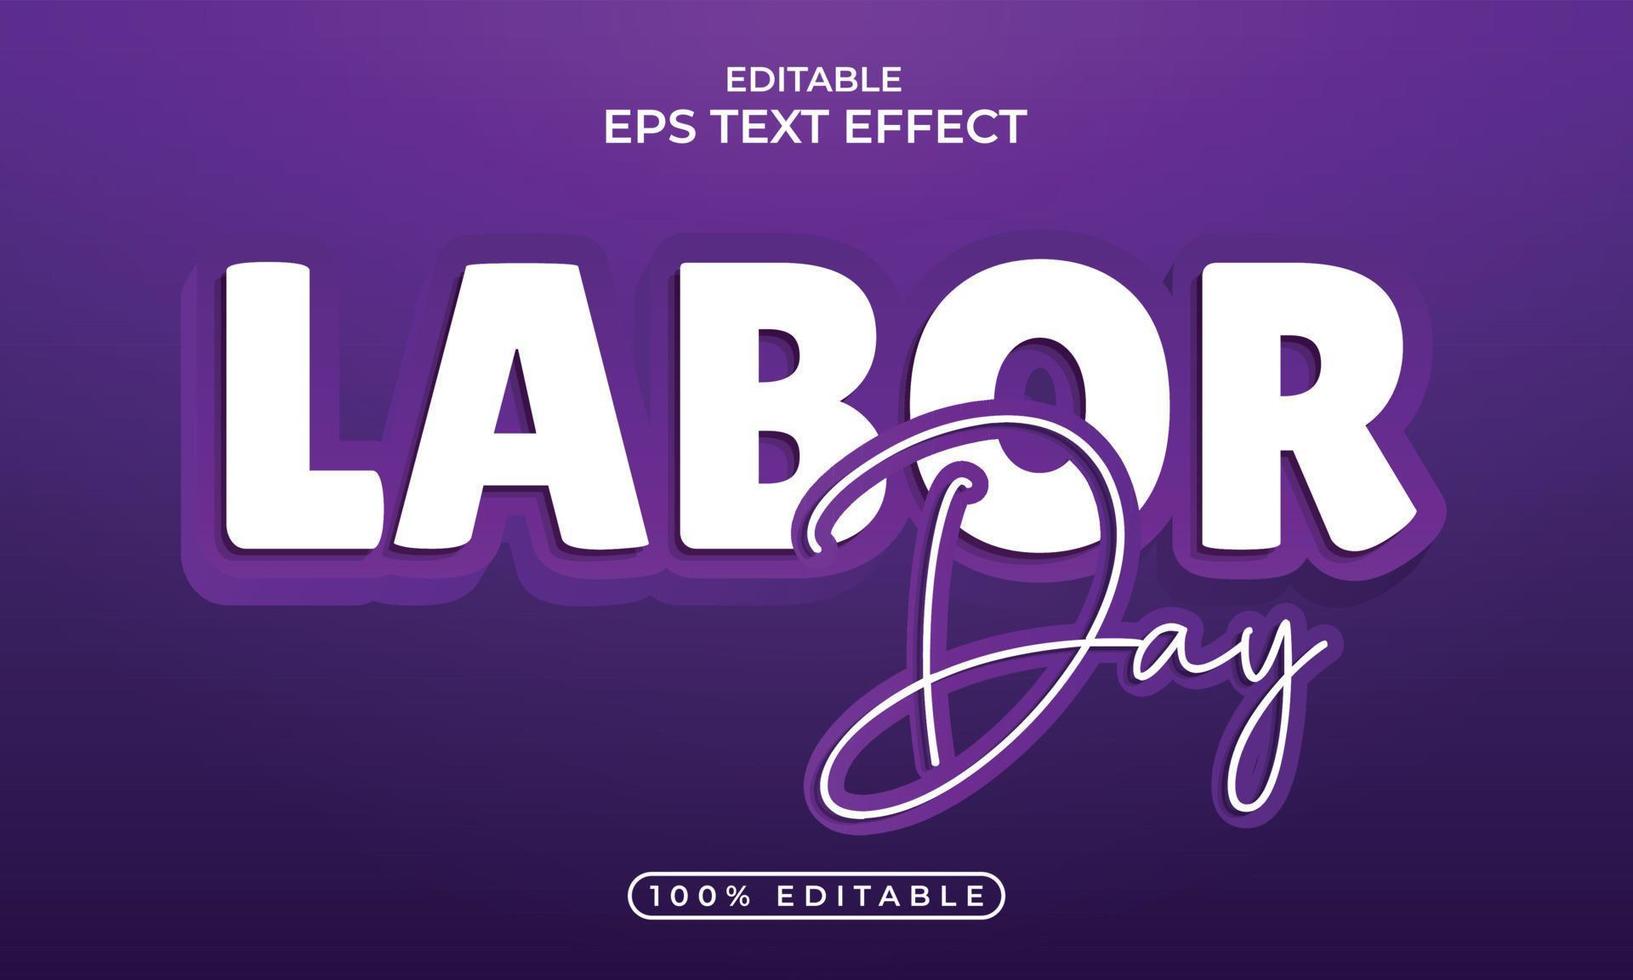 Colorful labor day editable text effect concept vector